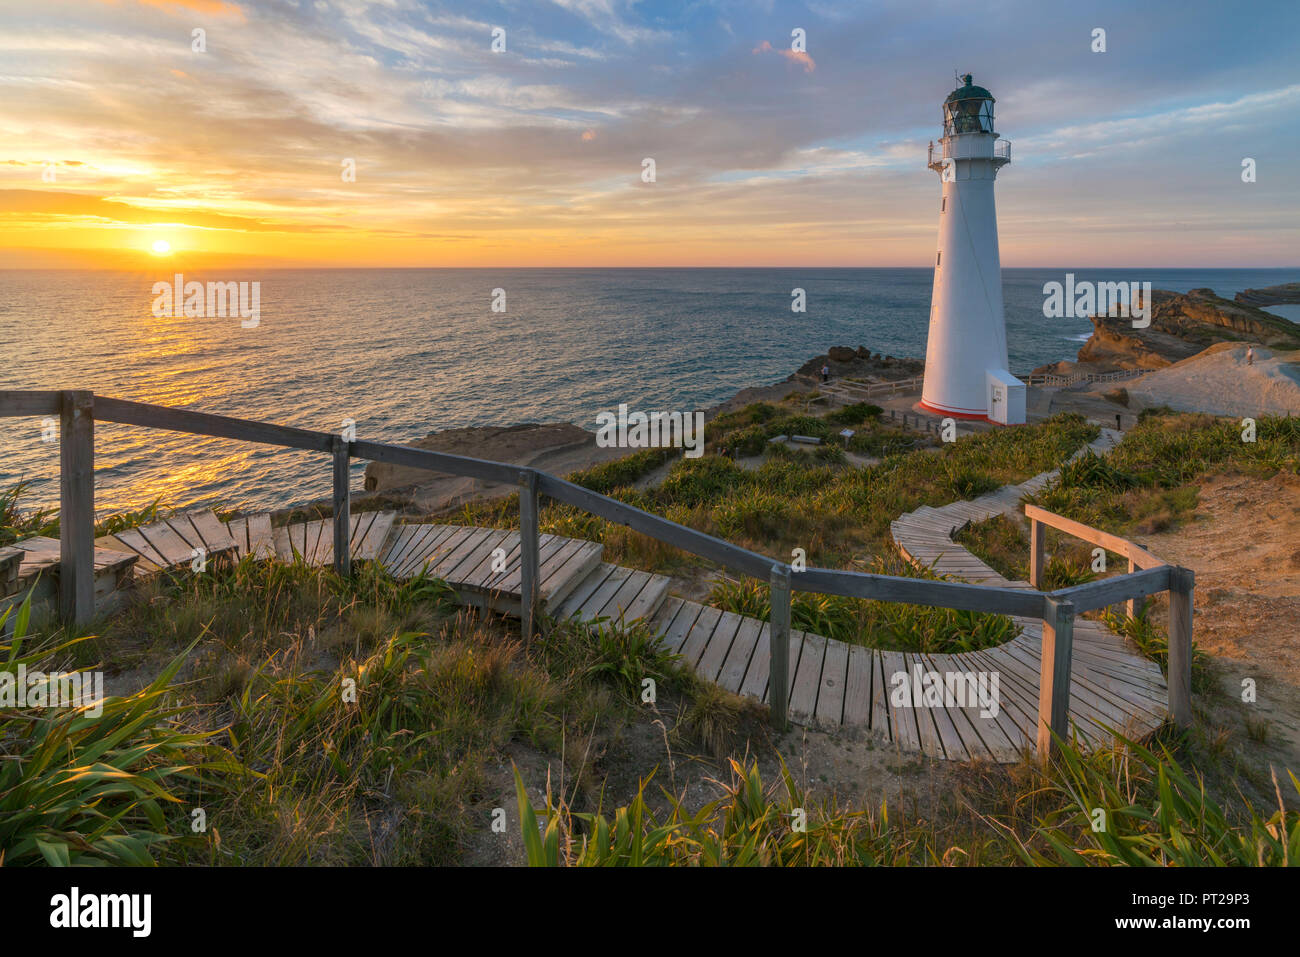 Castlepoint lighthouse at dawn, Castlepoint, Wairarapa region, North Island, New Zealand, Stock Photo